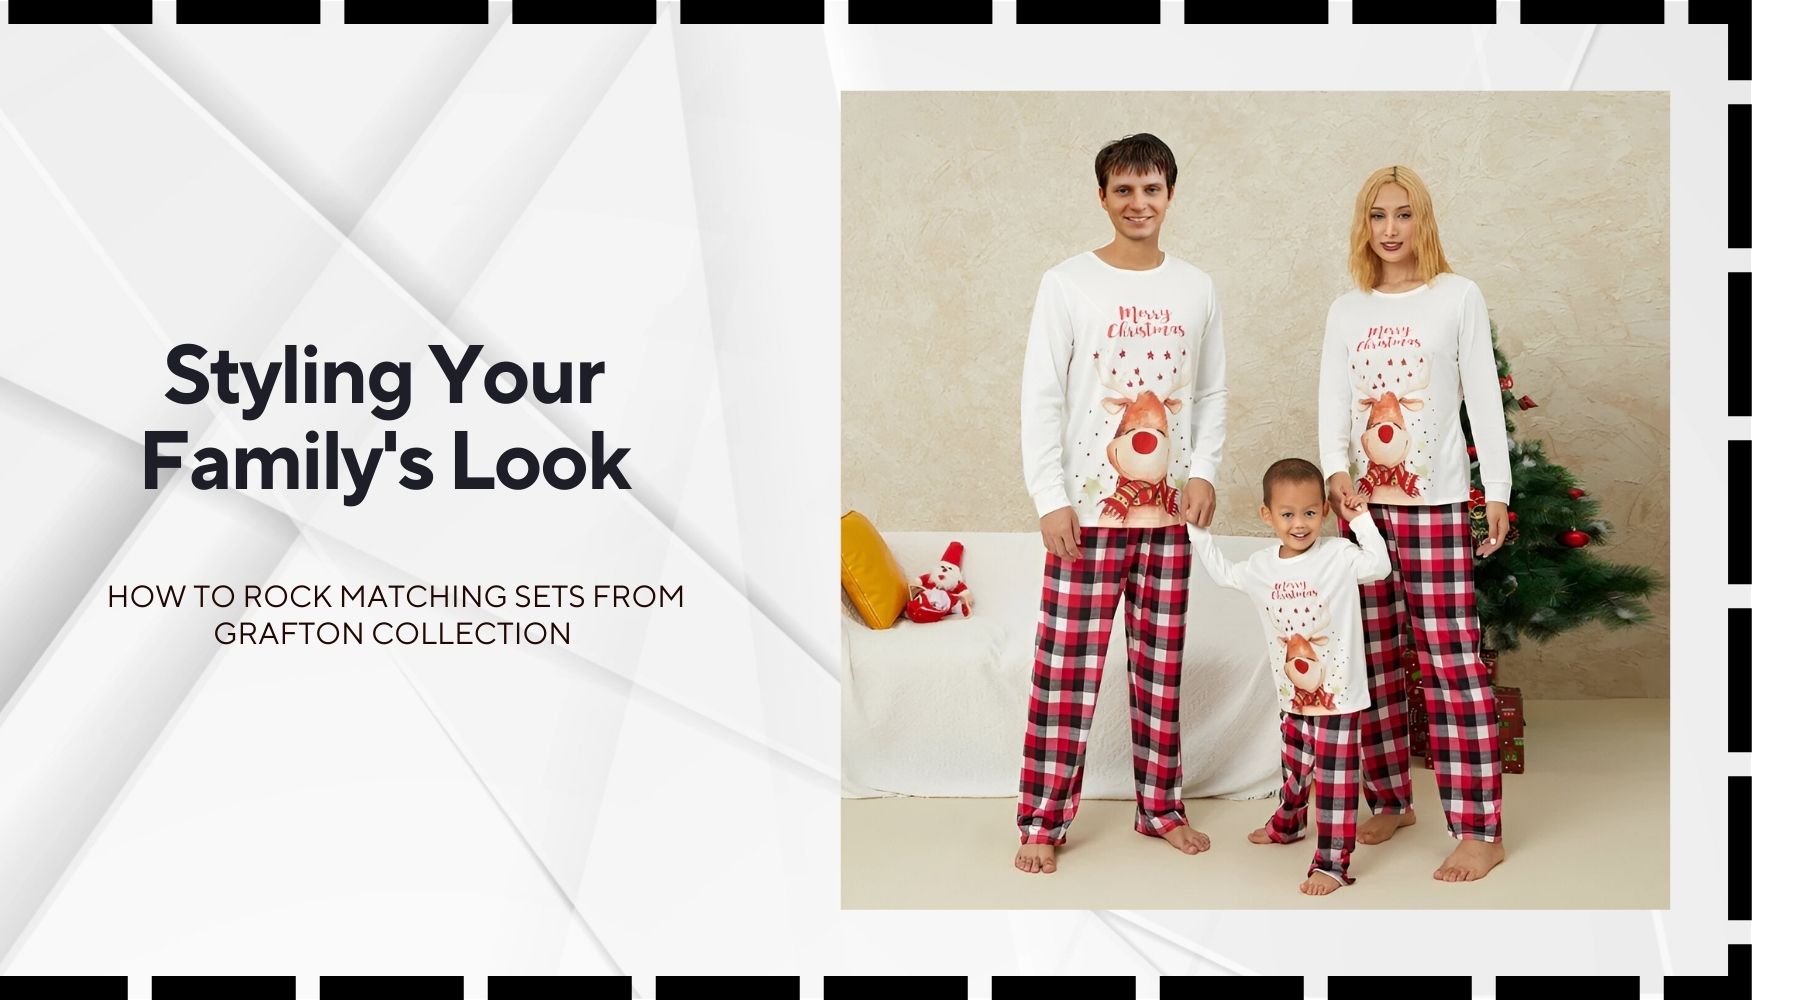 Styling Your Family's Look: How to Rock Matching Sets from Grafton Collection